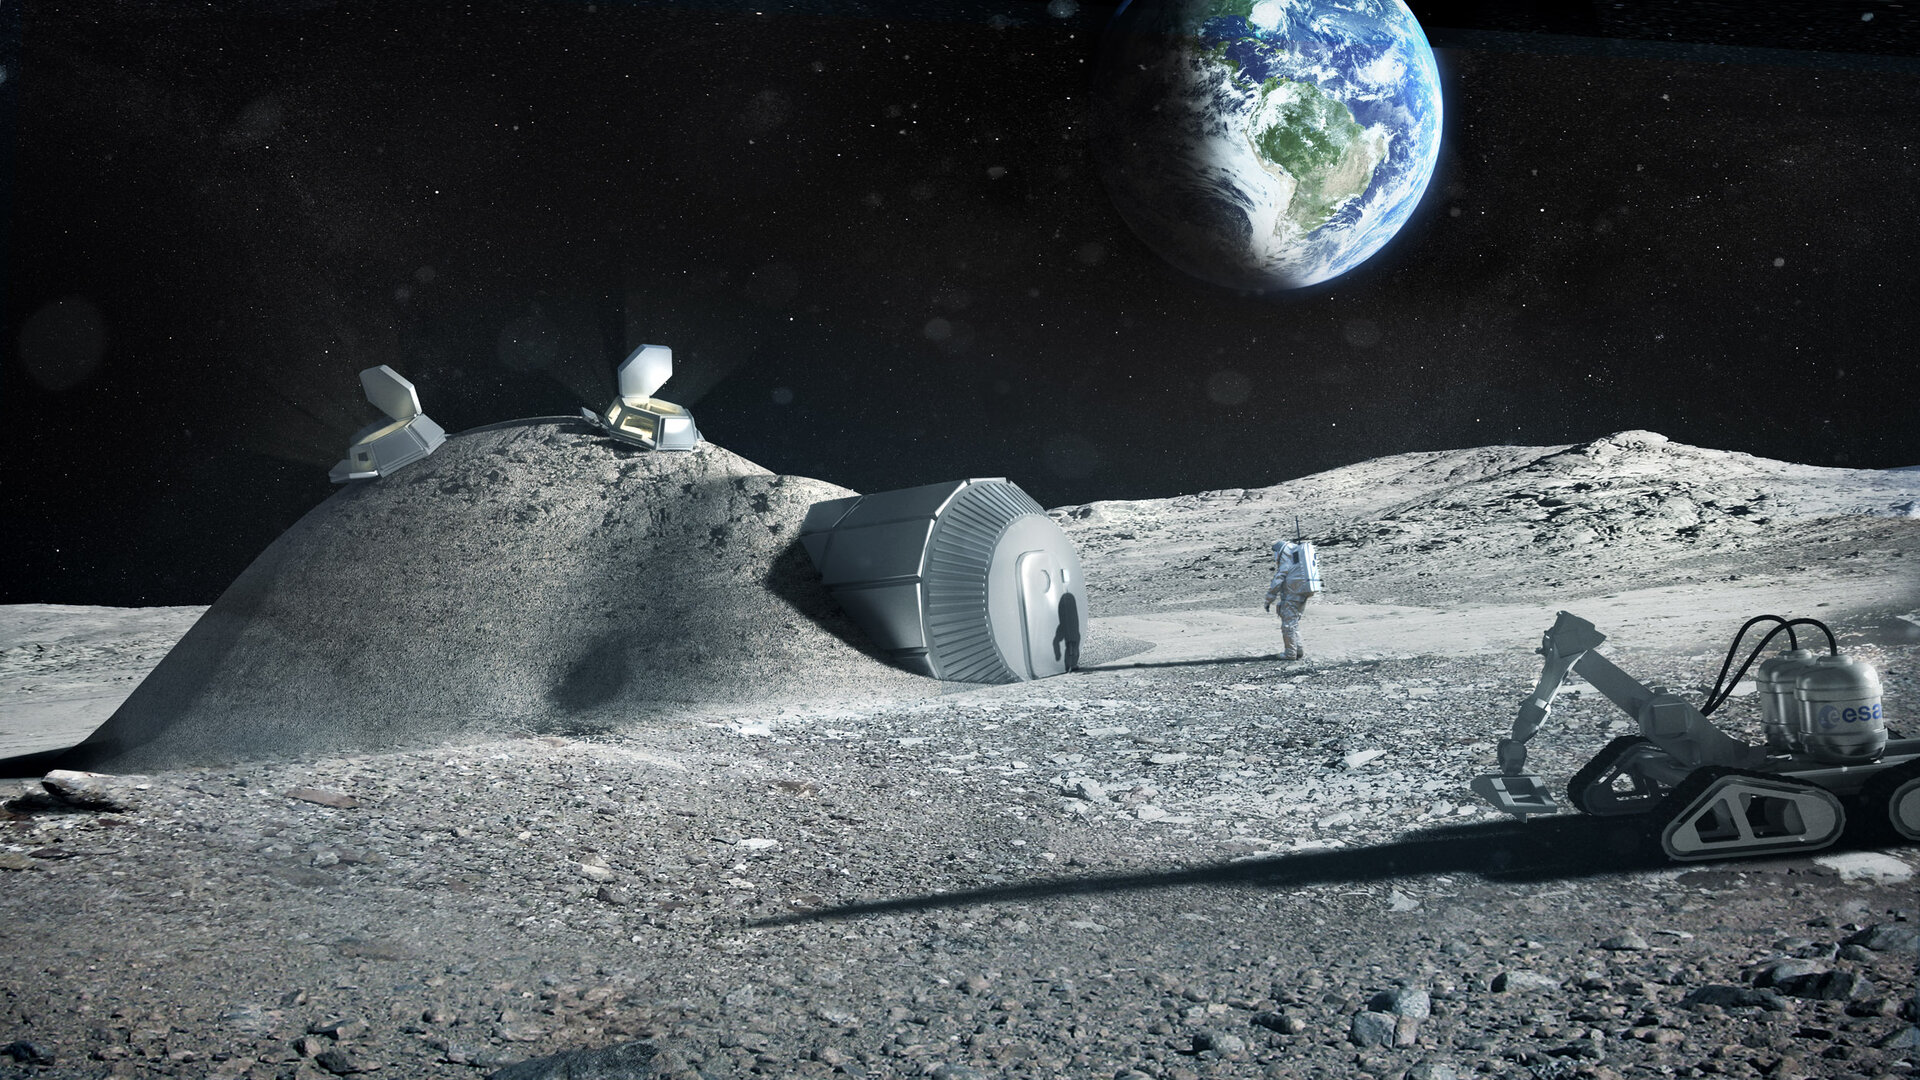 Astronauts could use moon dust to make bricks for a lunar base